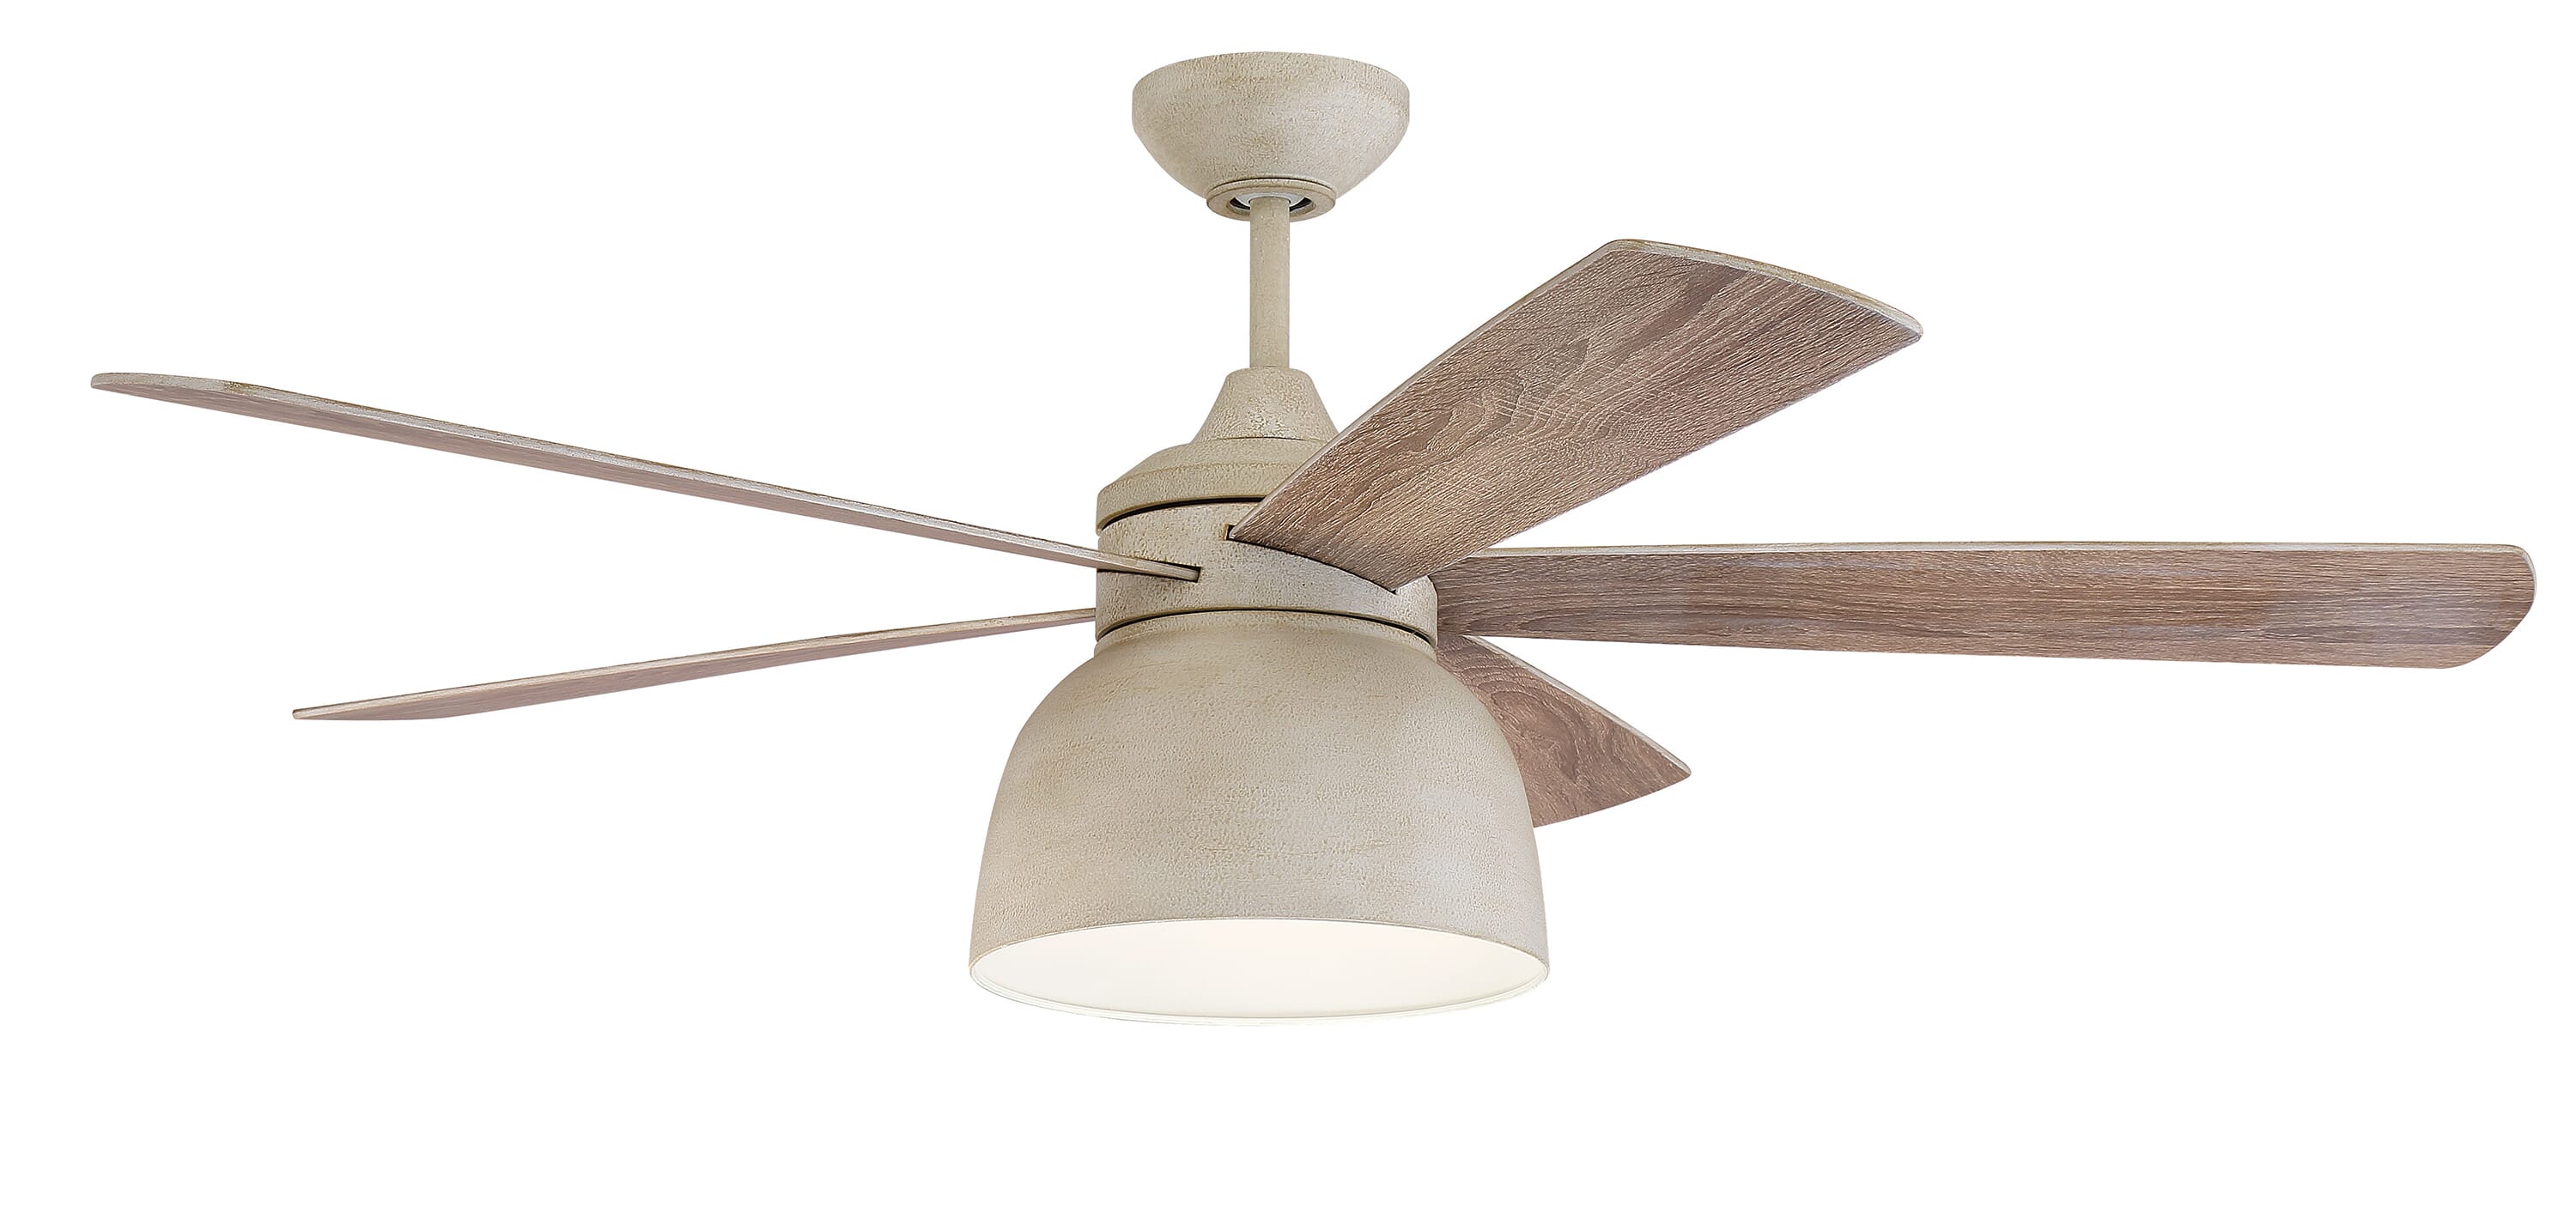 Craftmade 52"" Ventura Ceiling Fan in Cottage White -  VEN52CW5